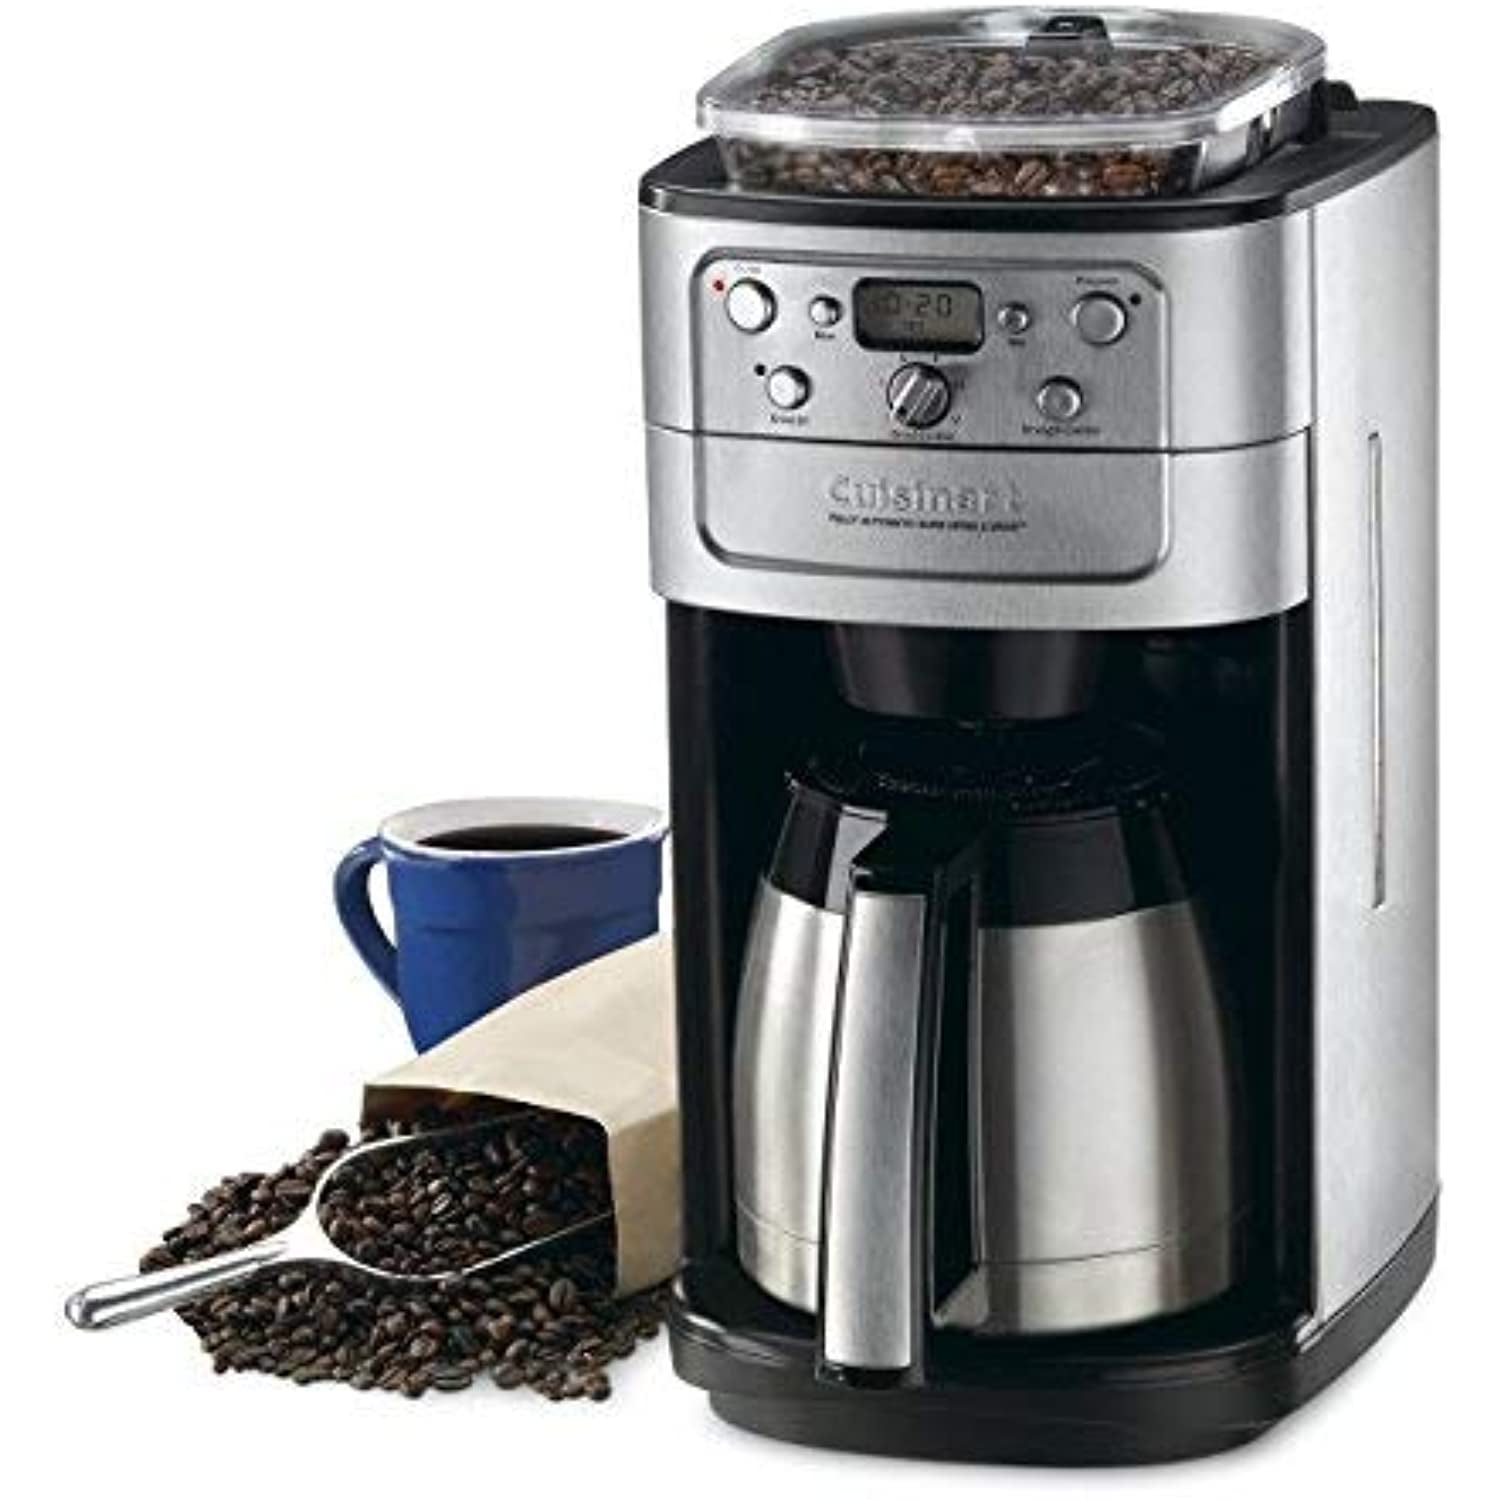 skyehomo 12 Cup Drip Coffee Maker with Built-In Burr Coffee Grinder,  Programmable Coffee Machine with Timer, Glass Carafe, Reusable Filter,  Warming